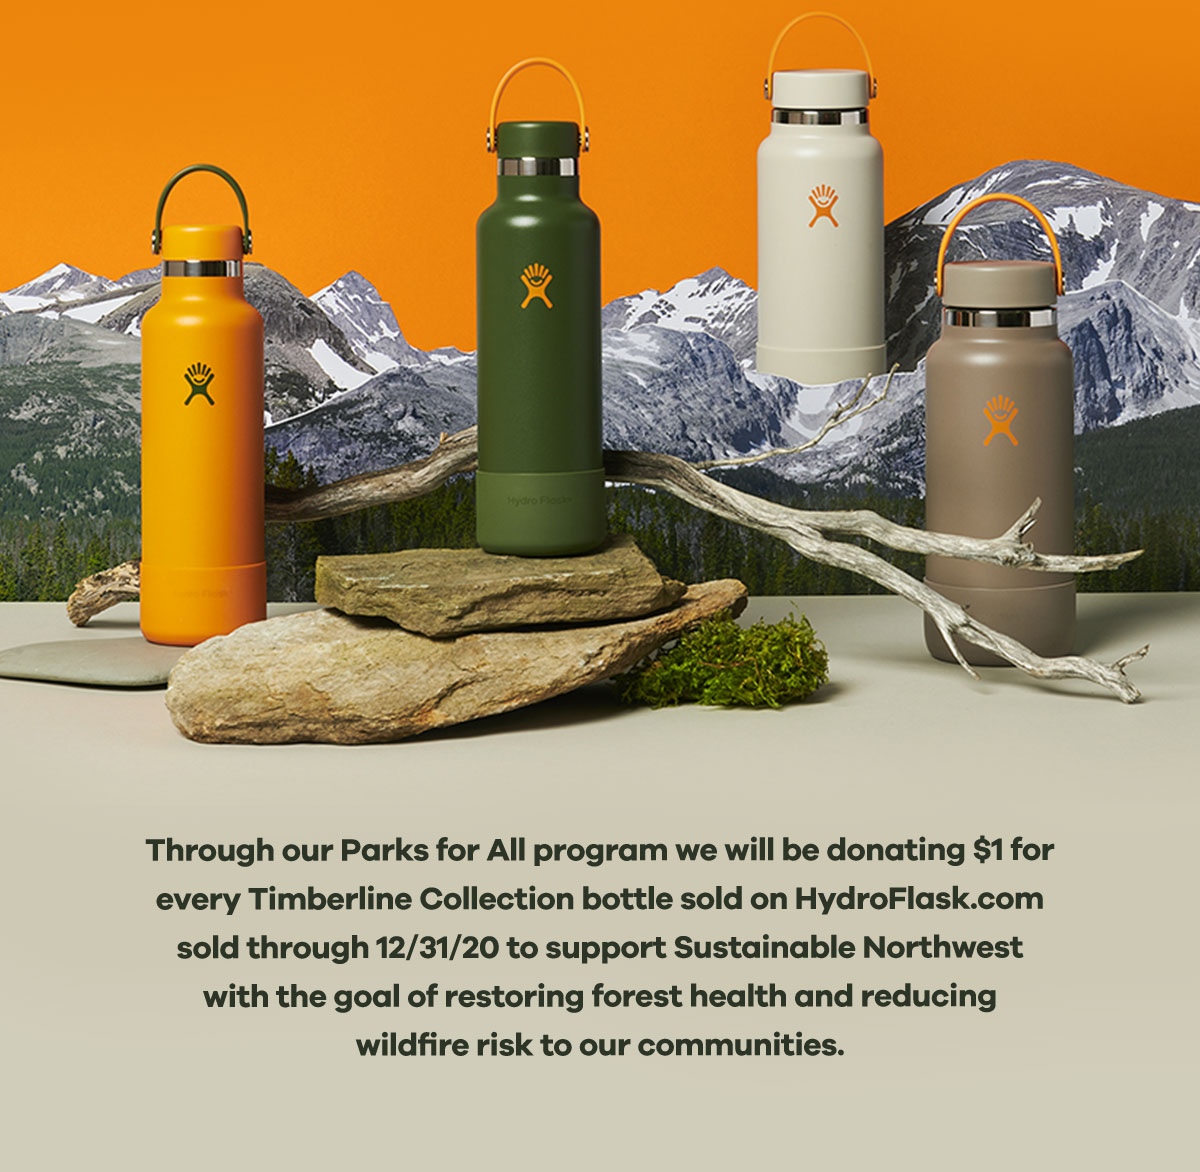 Through our Parks for All program we will be donating $1 for every Timberline Collection bottle sold on HydroFlask.com sold through 12/31/20 to support Sustainable Northwest with the goal of restoring forest health and reducing wildfire risk to our communities.